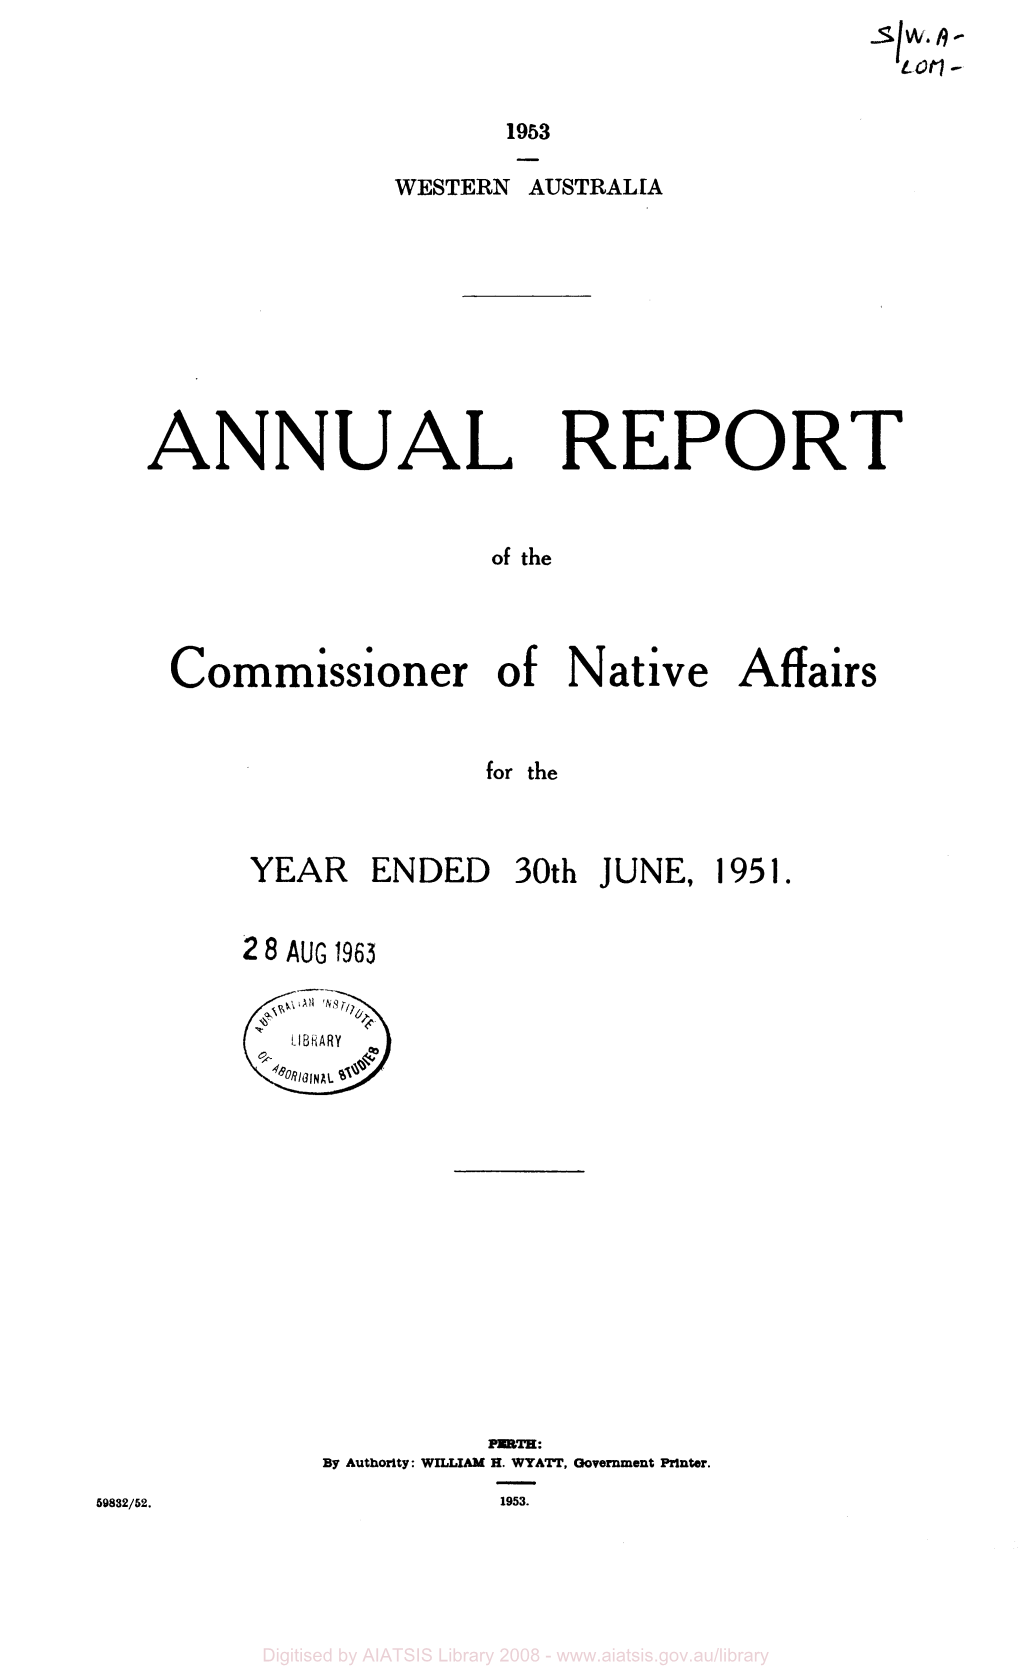 Annual Report of the Commissioner of Native Affairs for the Year Ended 30Th June 1951